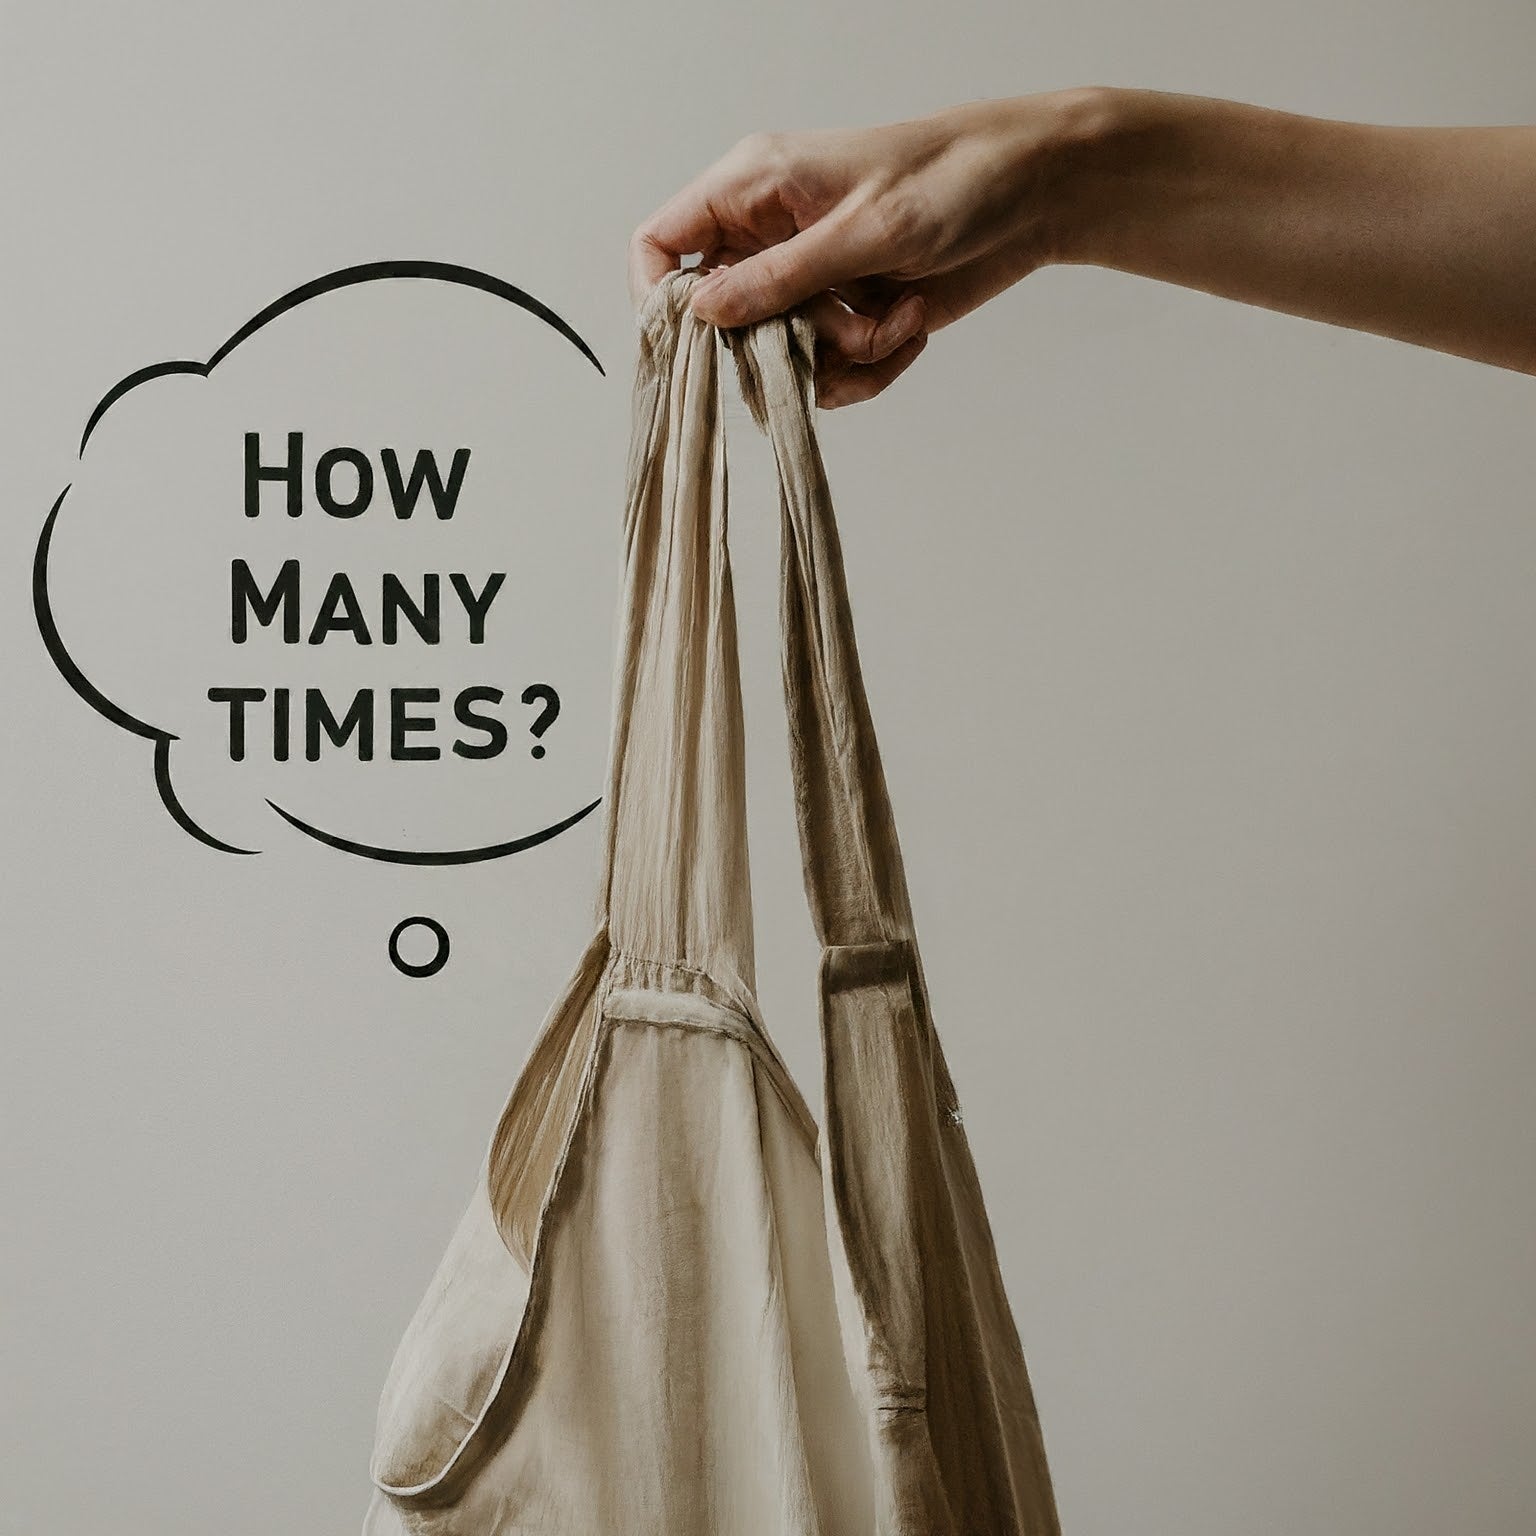 How many times do you need to reuse your reusable grocery bags?